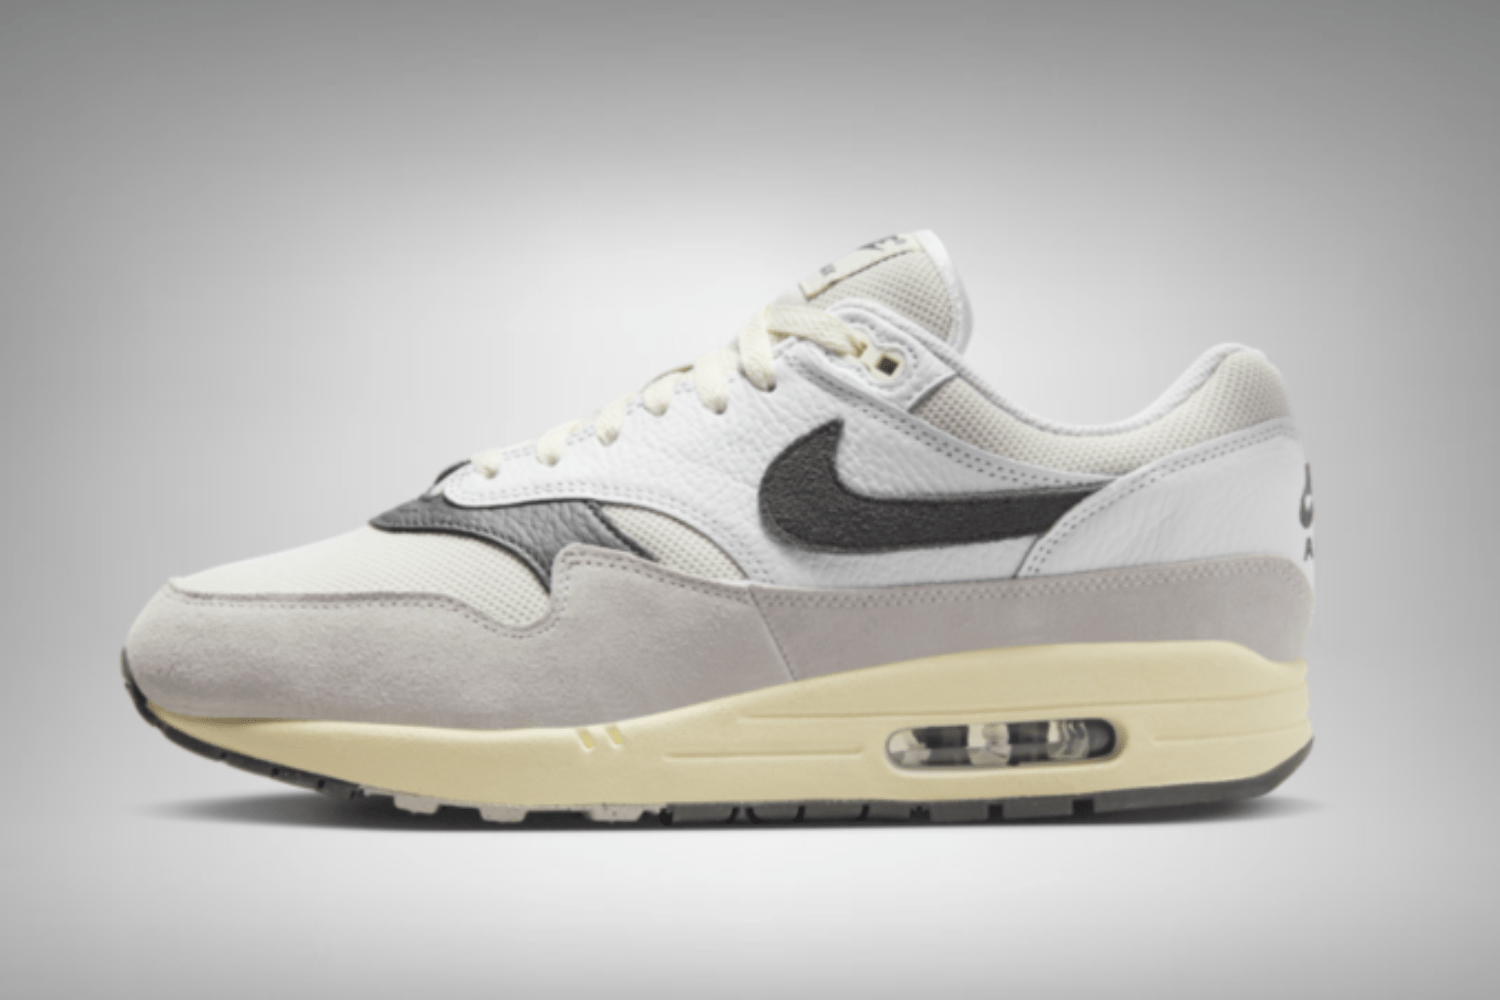 A new Nike Air Max 1 appears in Greyscale and Sail shades